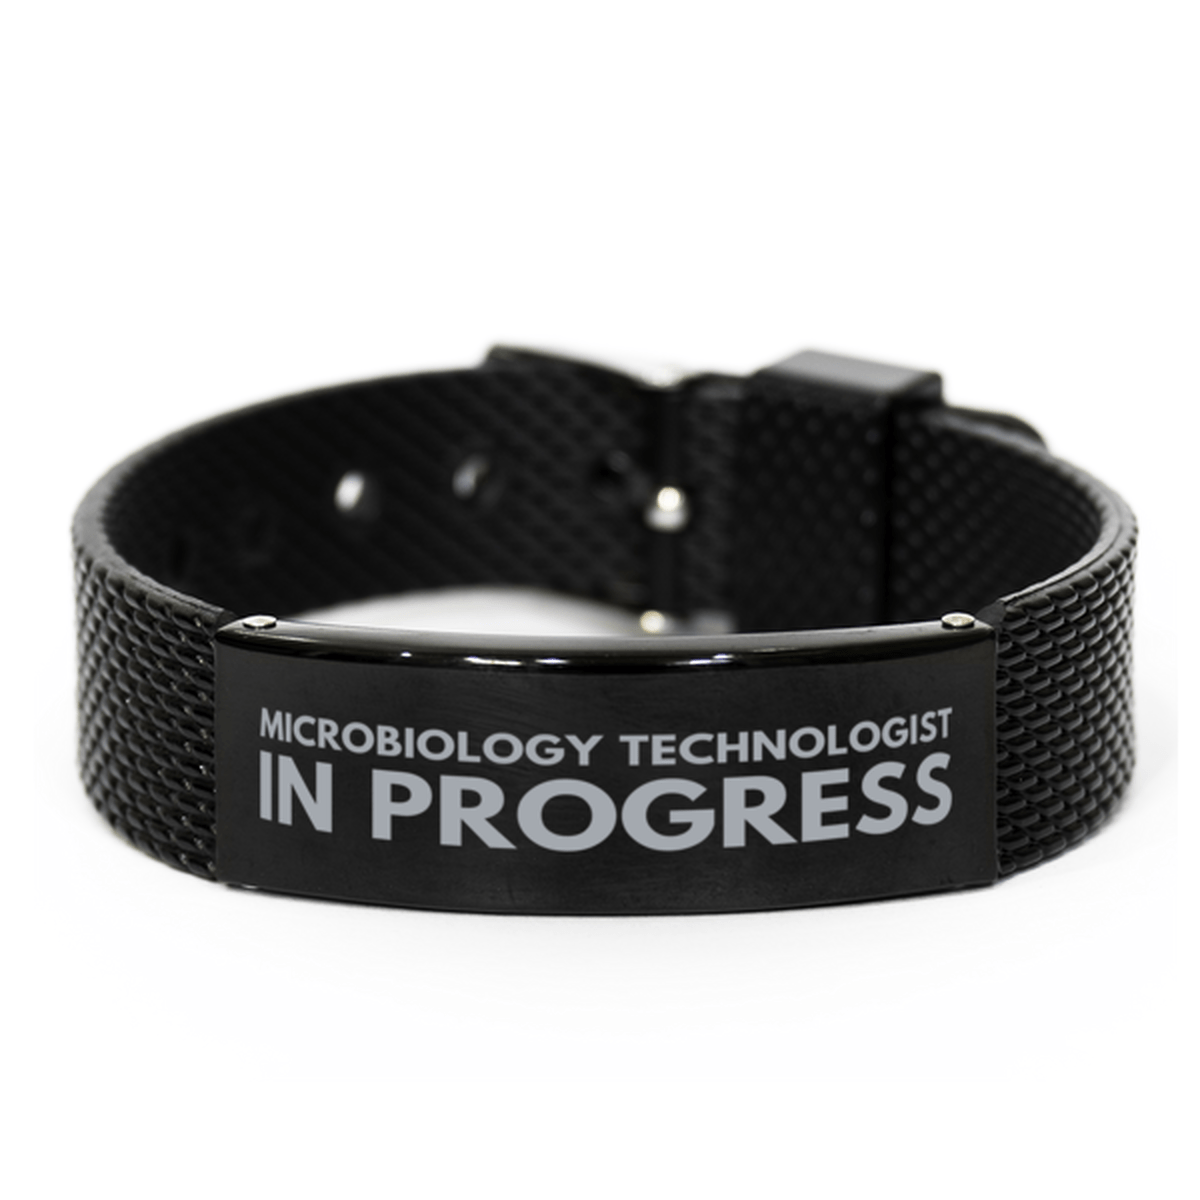 Inspirational Microbiology Technologist Black Shark Mesh Bracelet, Microbiology Technologist In Progress, Best Graduation Gifts for Students